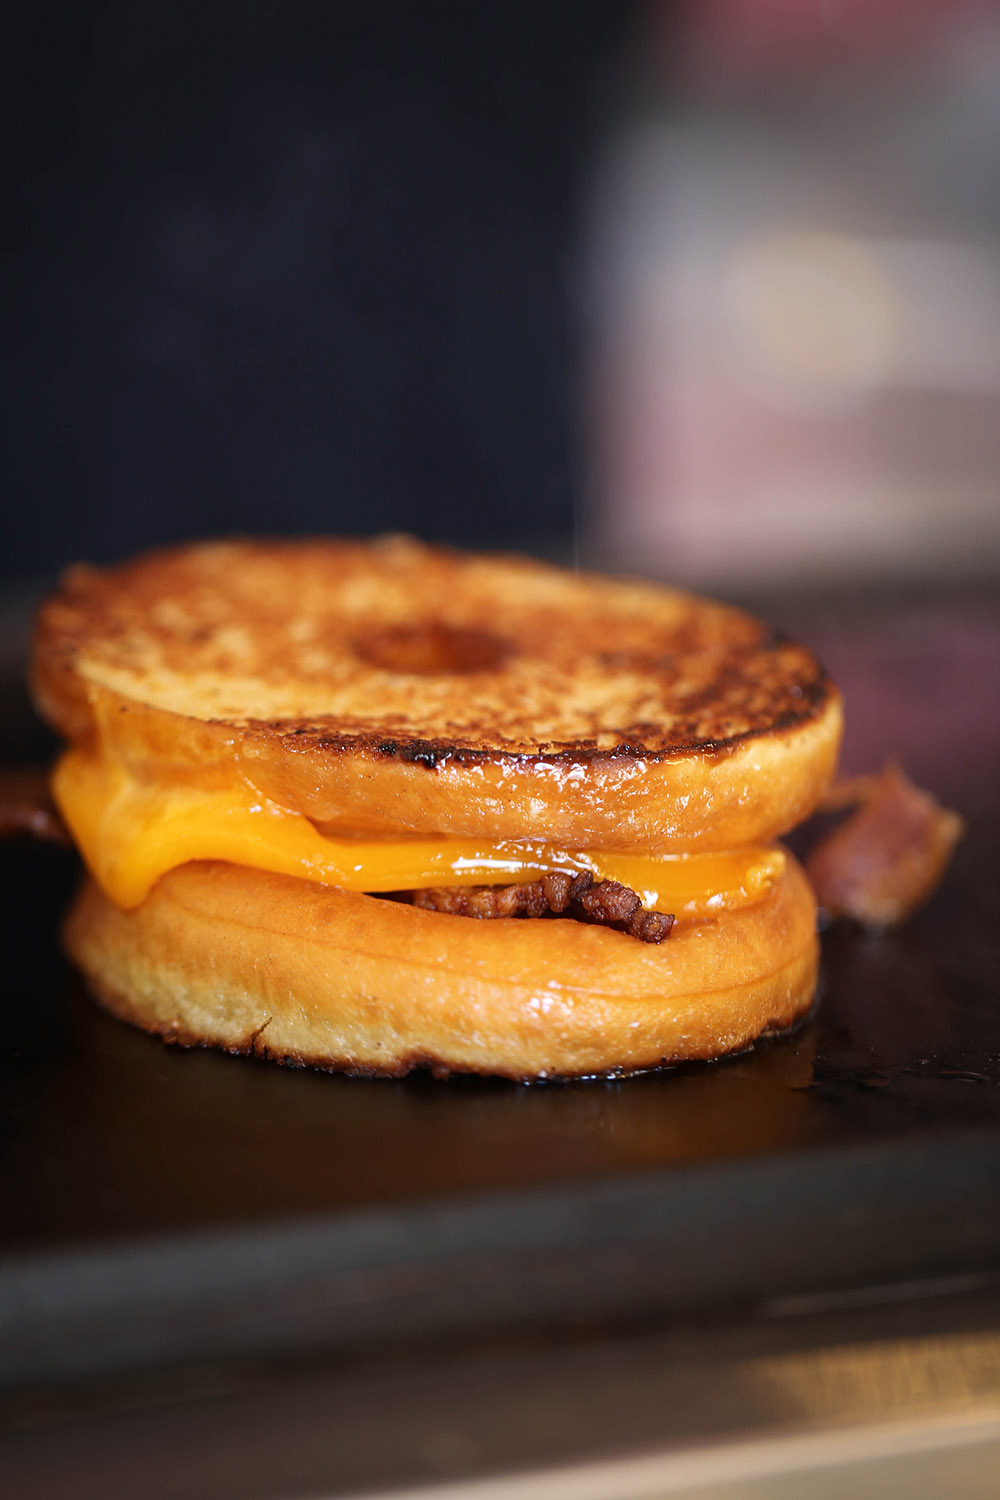 The grilled cheese doughnut. Photo by Catherine Downes.